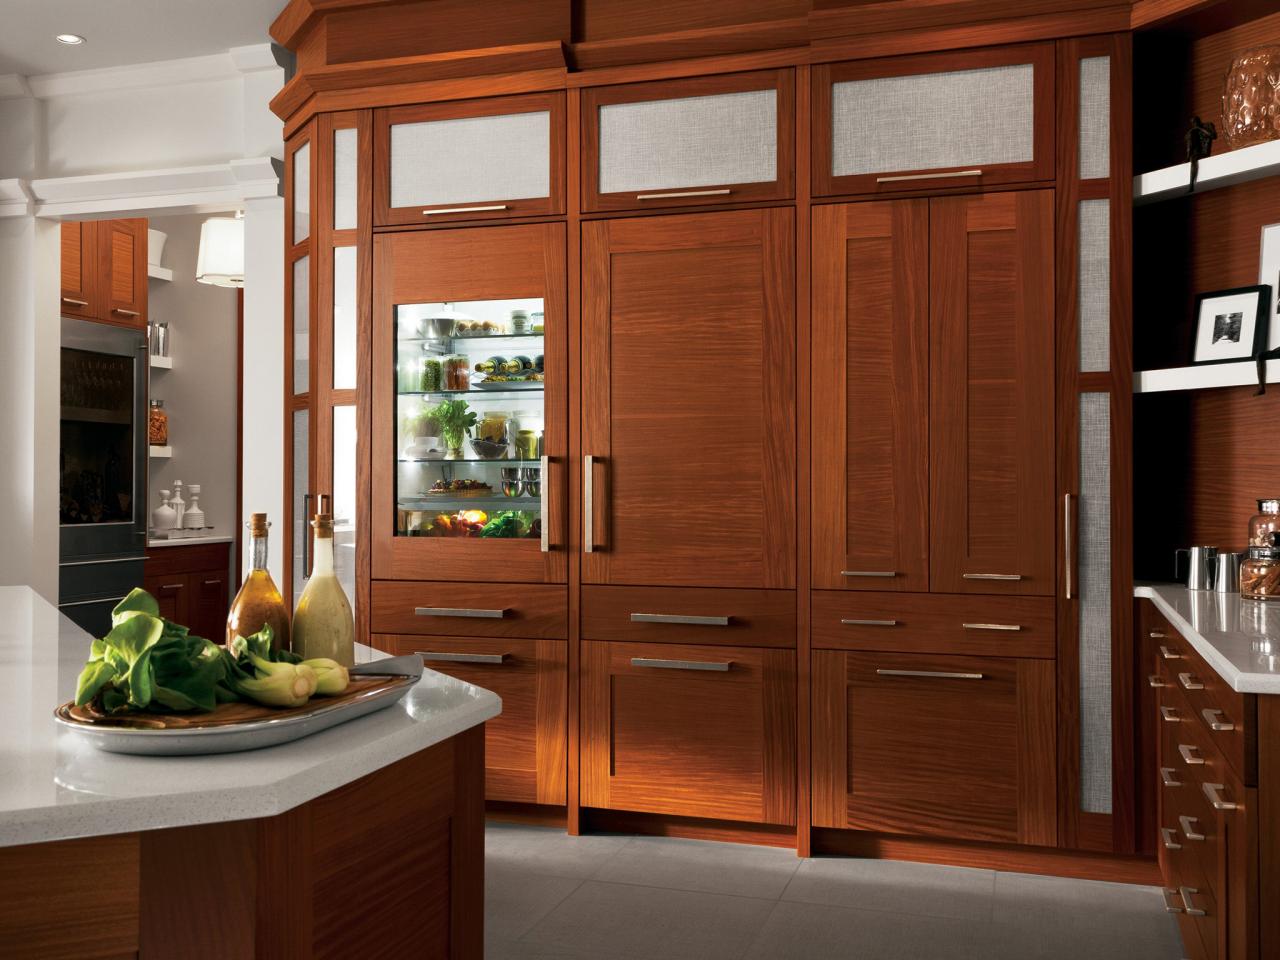 Custom Kitchen Cabinets Pictures Ideas Tips From Hgtv Hgtv